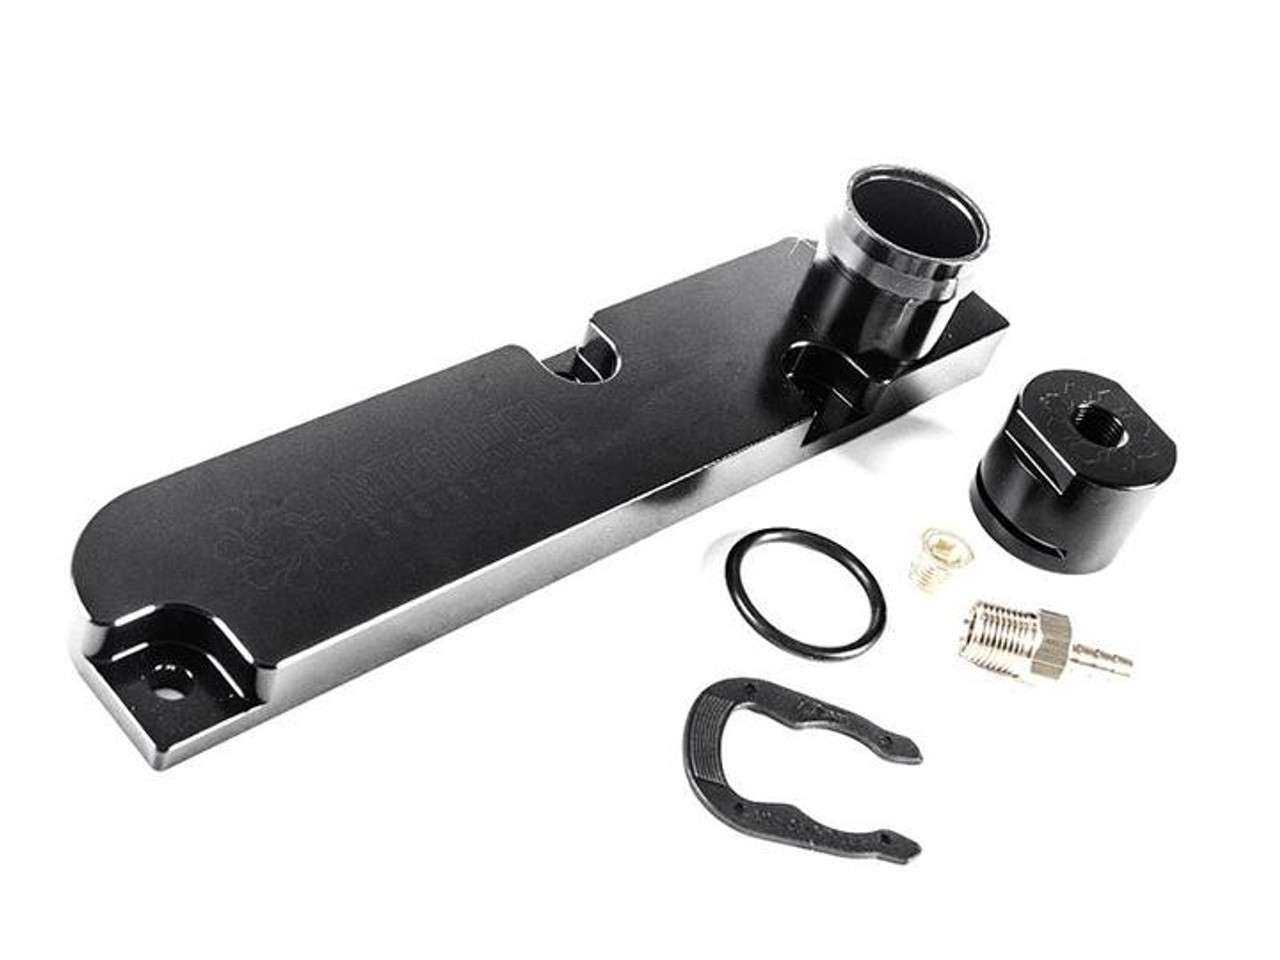 IE 2.0T FSI PCV Solution Kit, Includes Valve Cover Plate and Boost Cap - Black Anodize